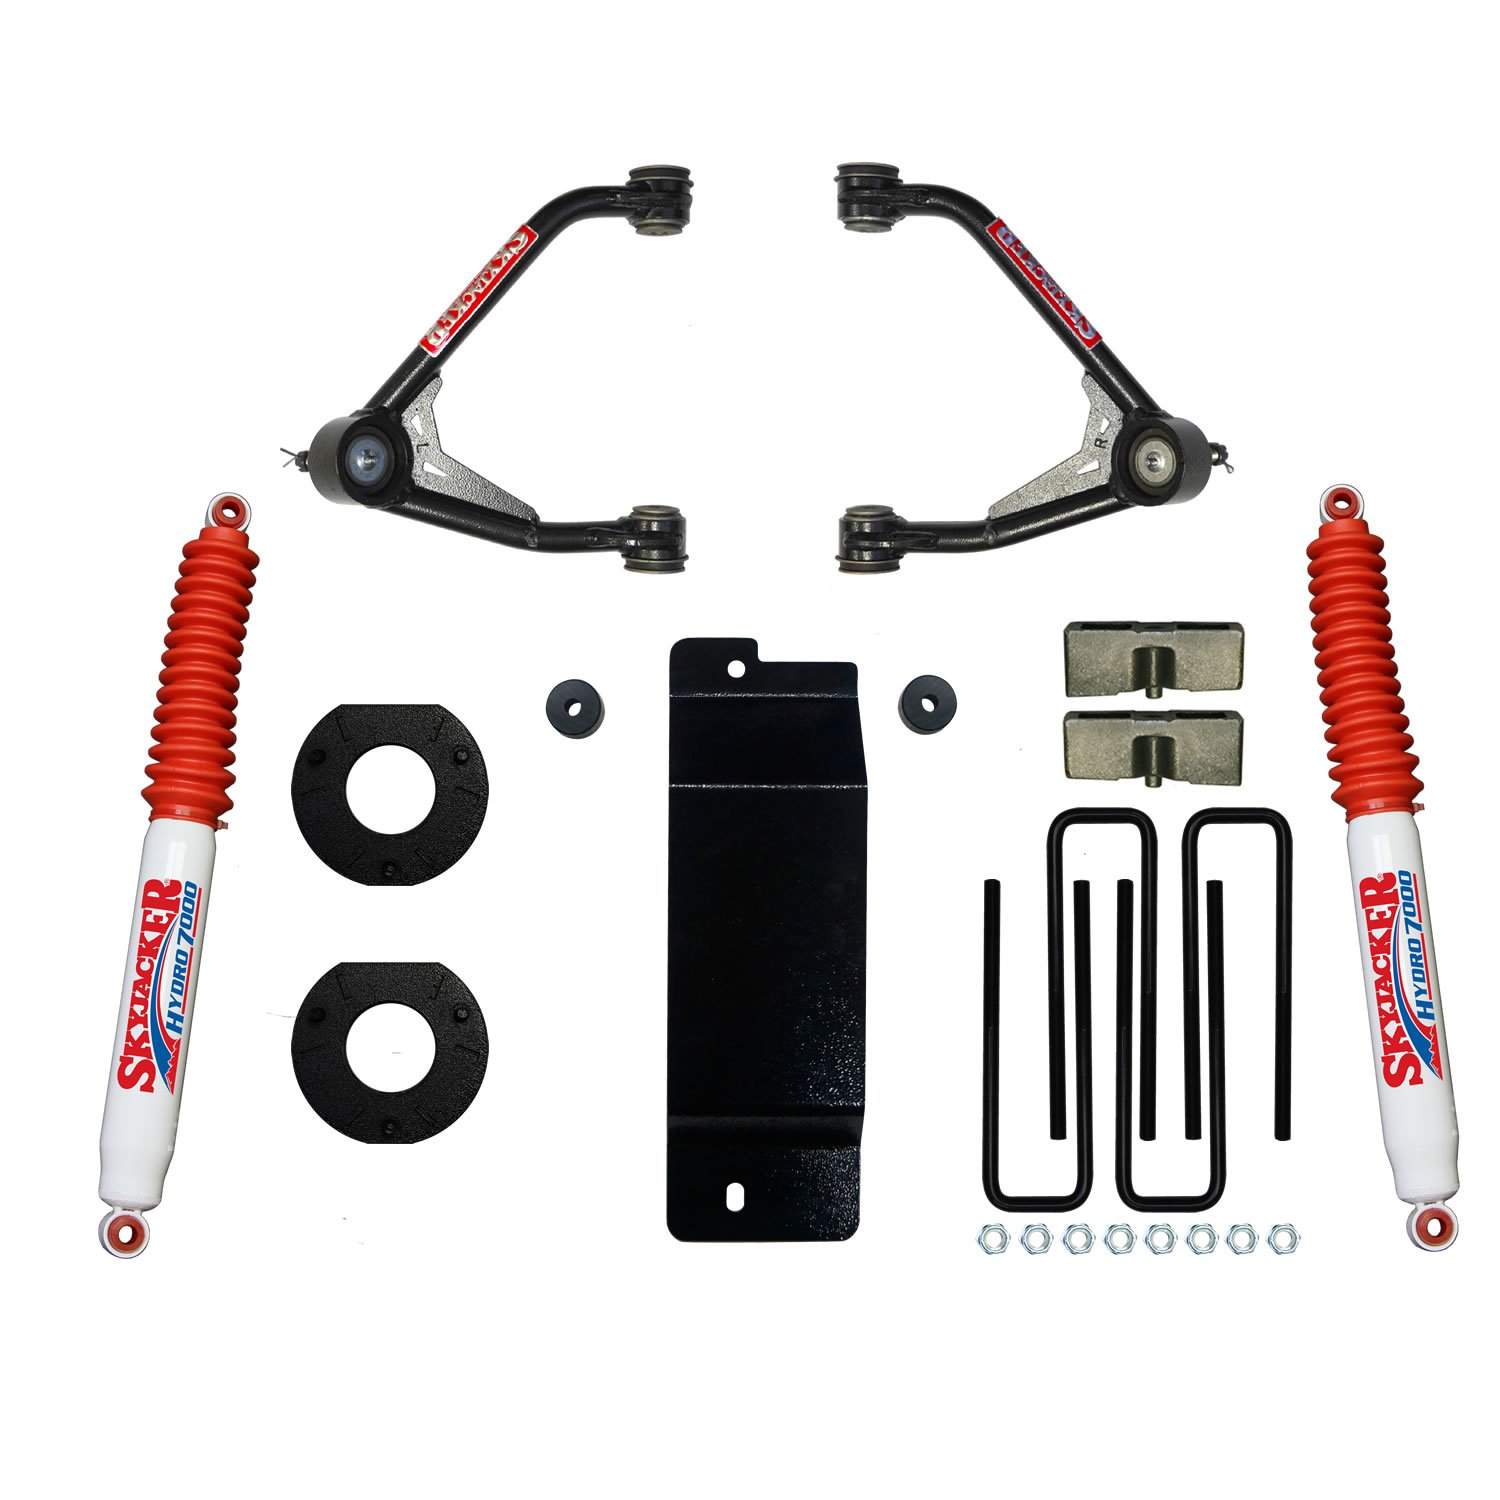 3.500-4.000 In. Upper Control Arm Lift Kit with Hydro7000 Rear Shocks